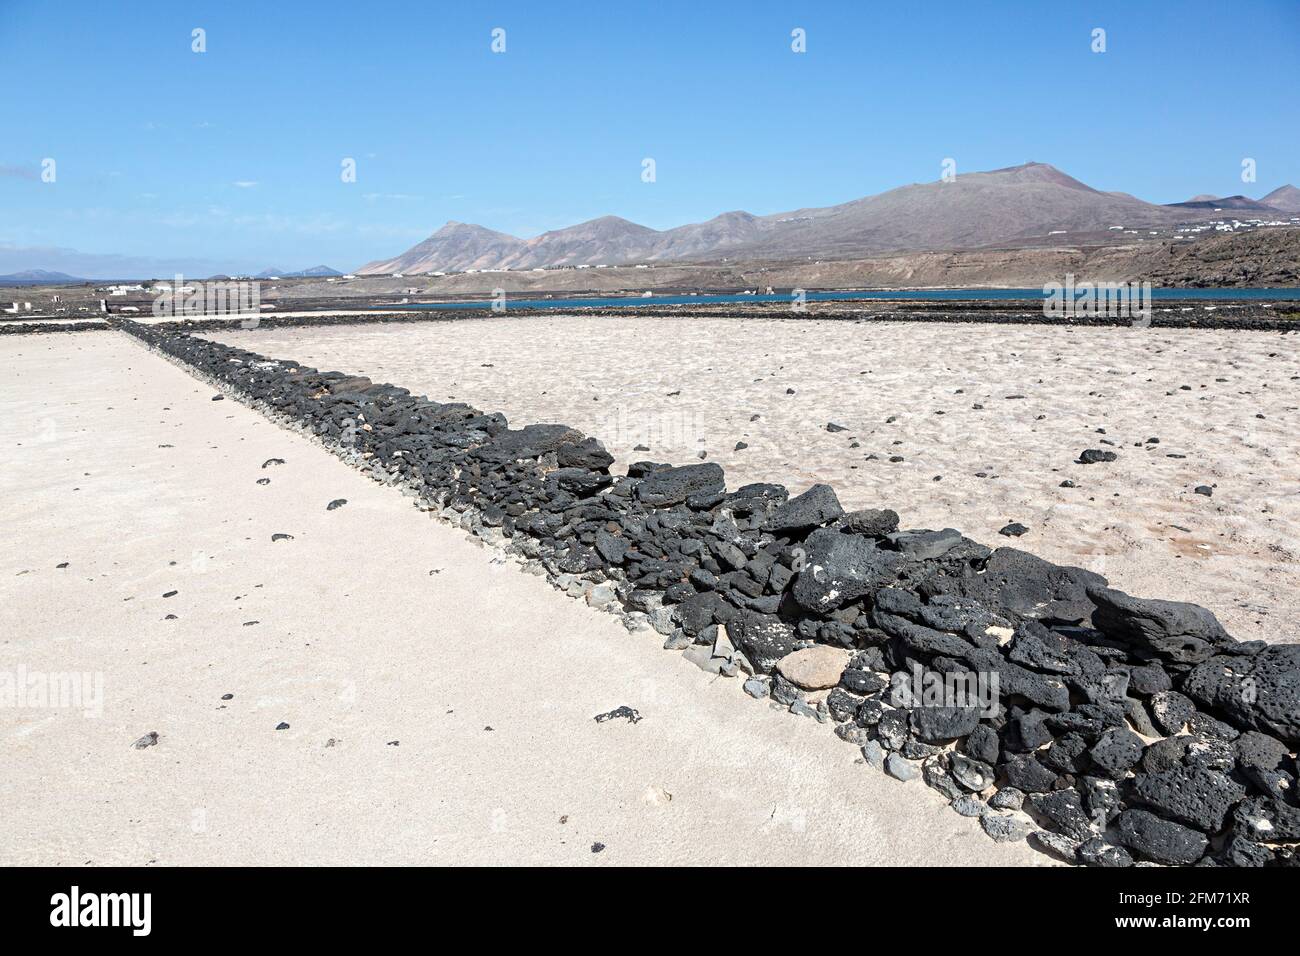 Dry wall made from volcanic rock in dry salt pans, Salinas de Janubio, Lanzarote, Canary Islands, Spain Stock Photo